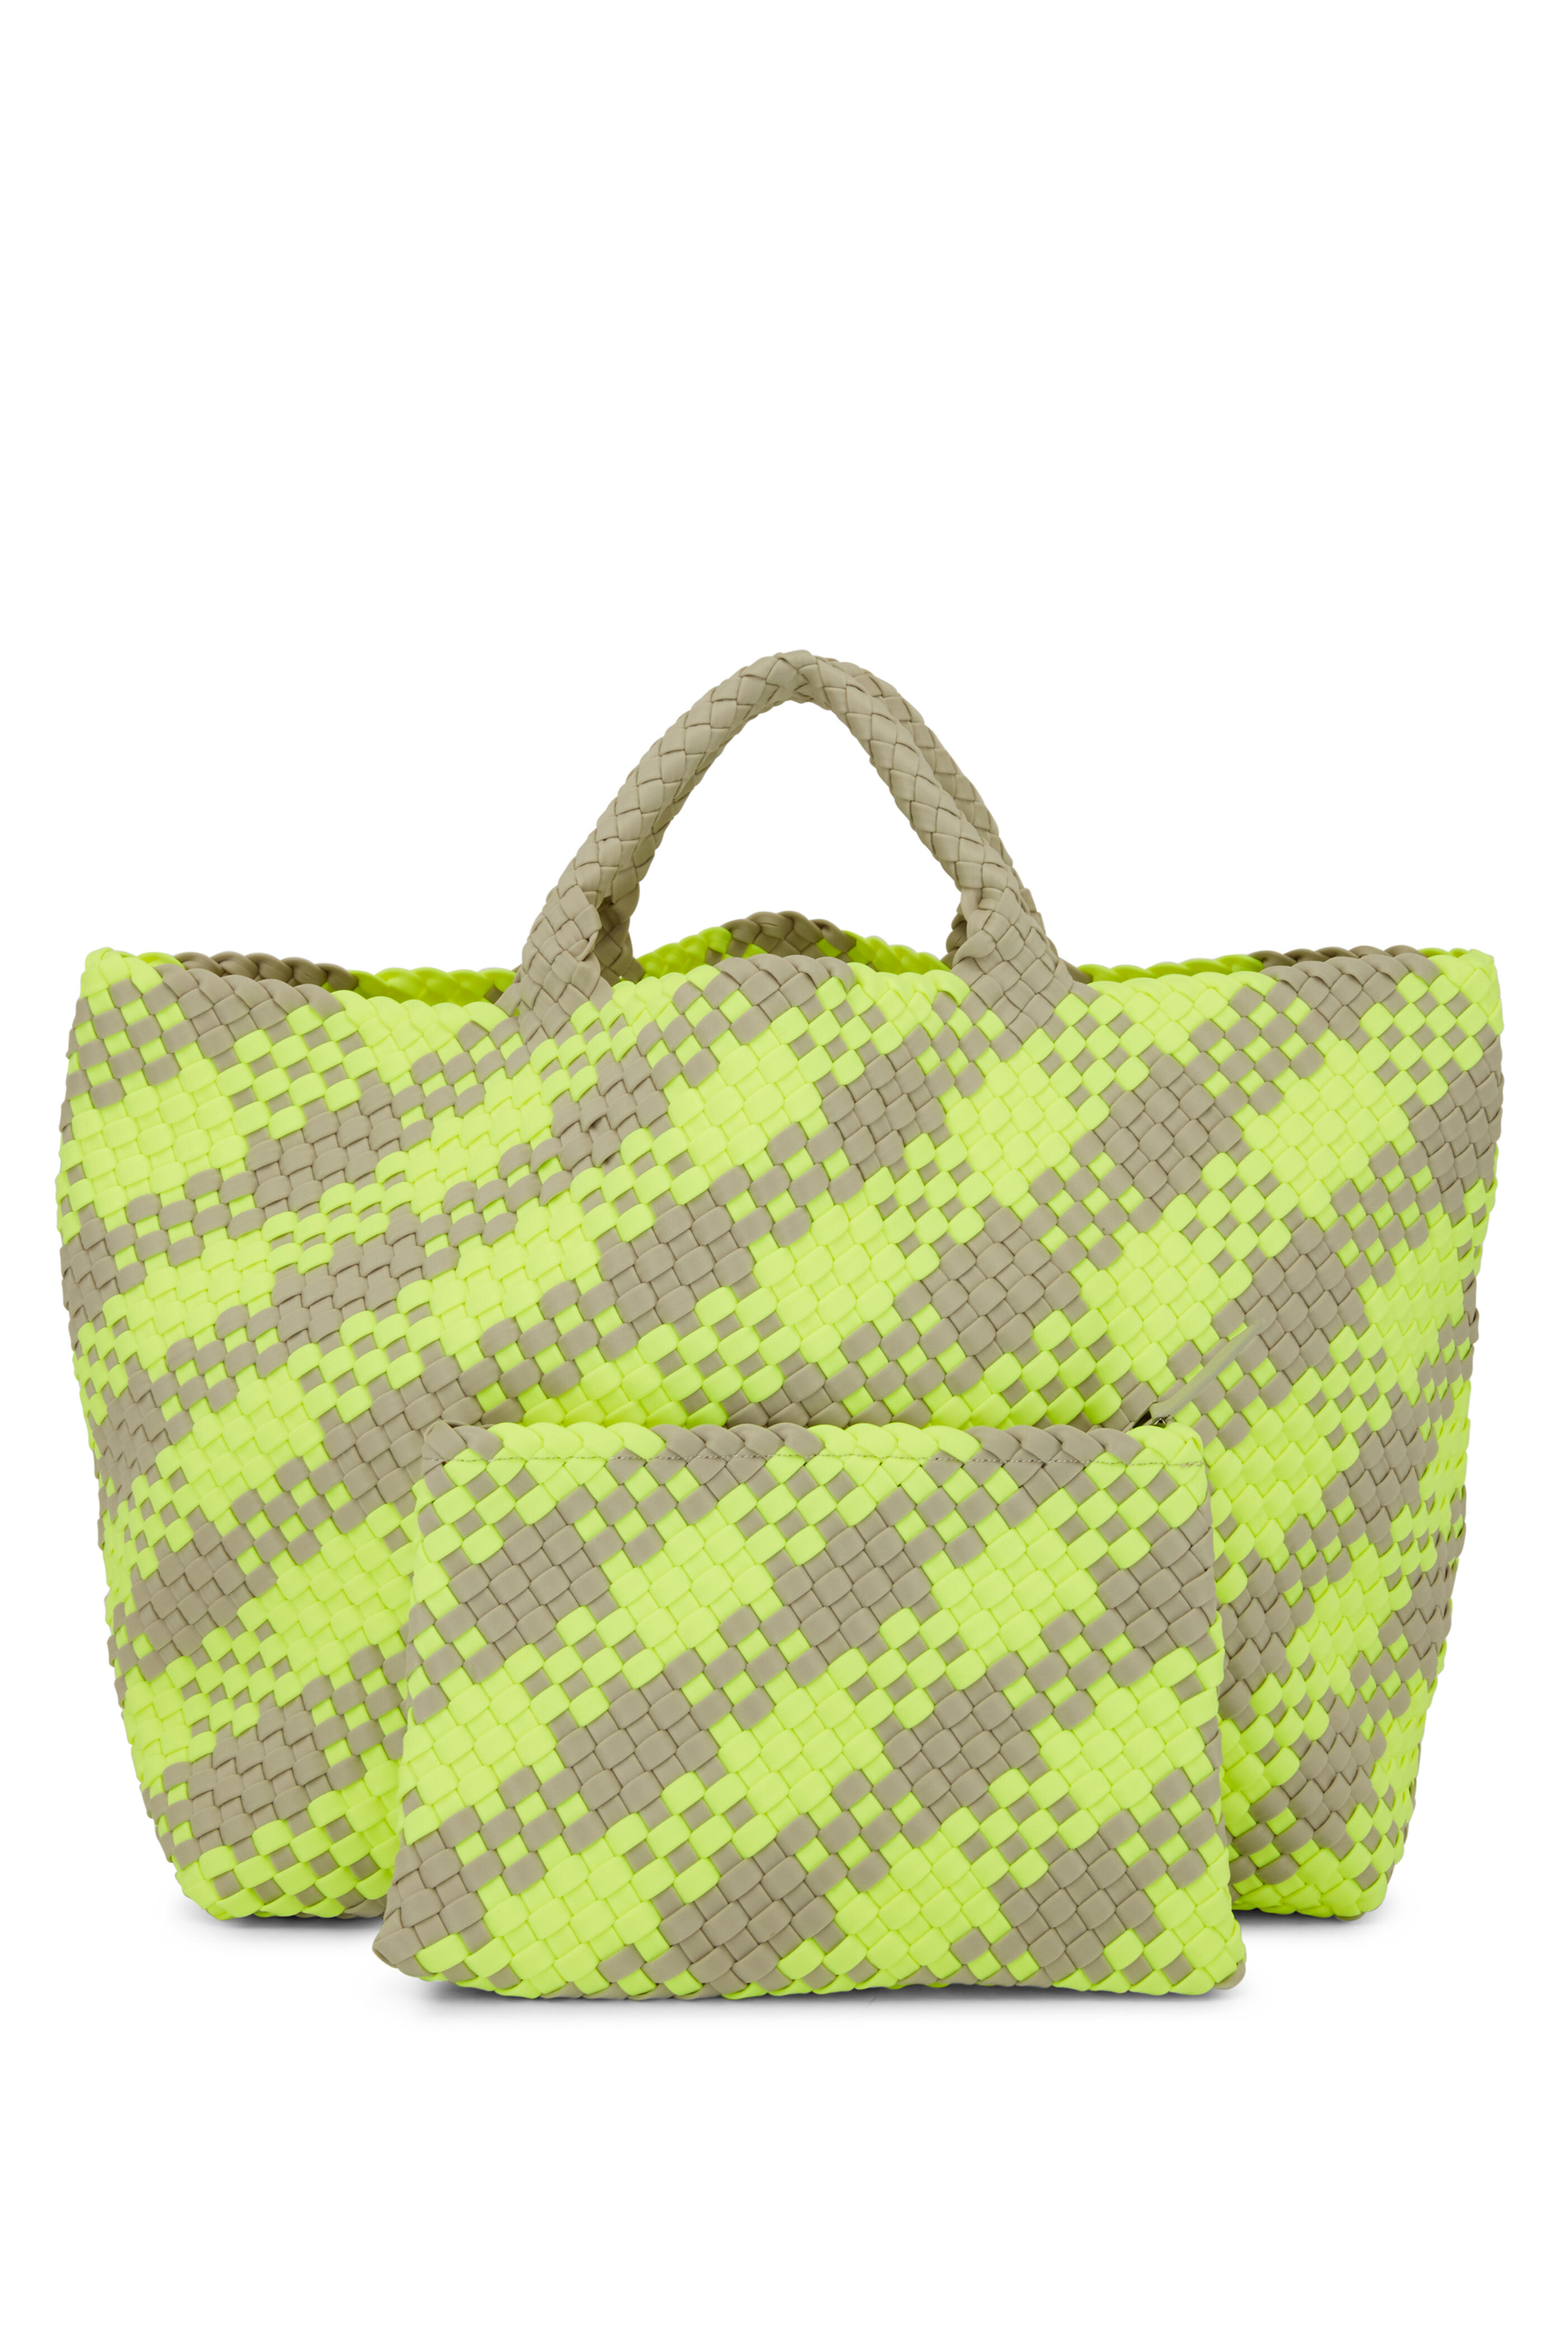  St. Barth's Beach Graphic Tote Bag : Clothing, Shoes & Jewelry